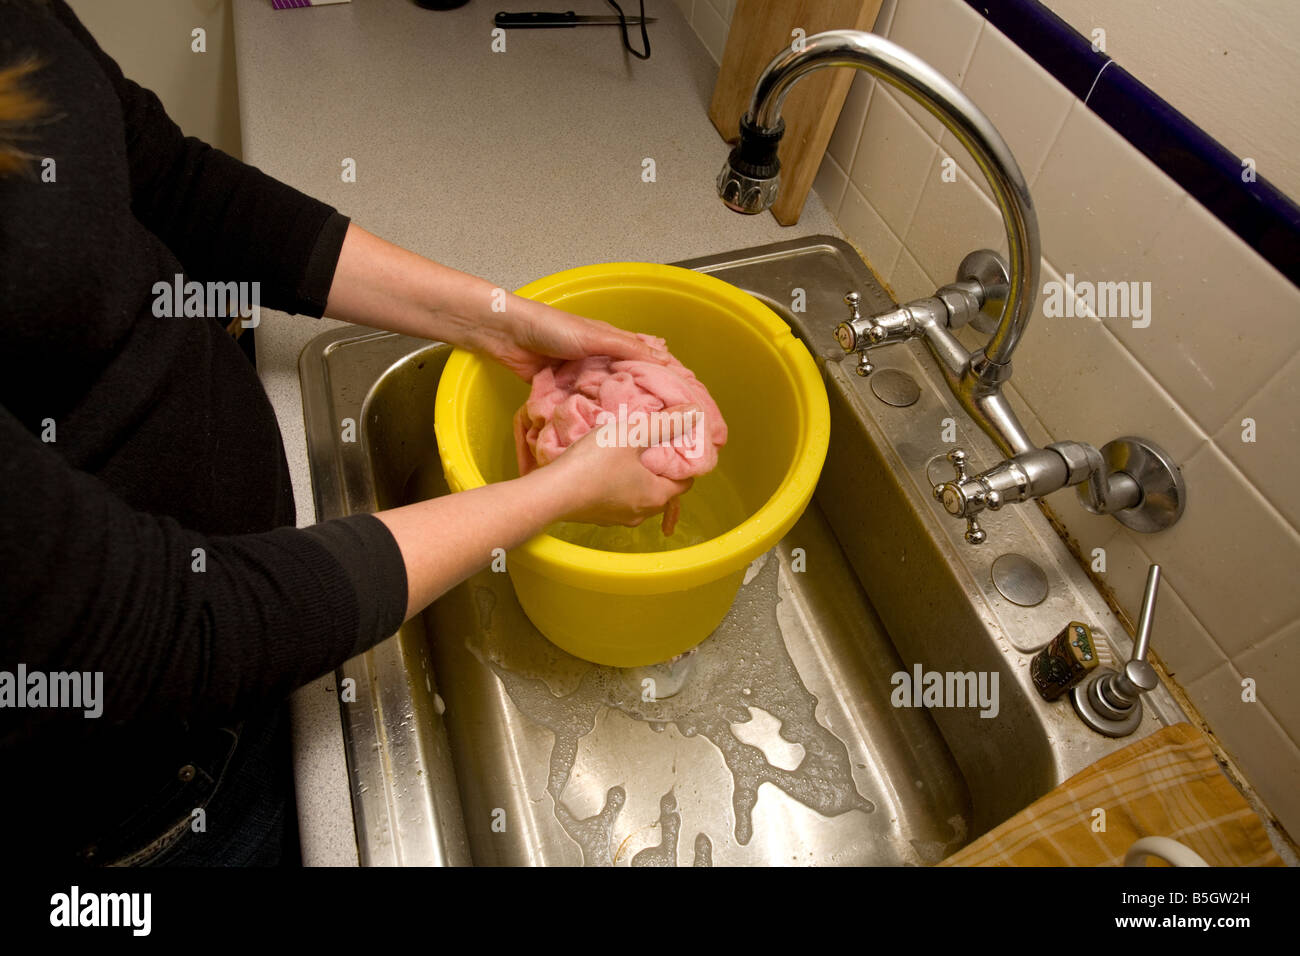 Woman Hand Washing Clothes In Sink Stock Photo 20654553 Alamy